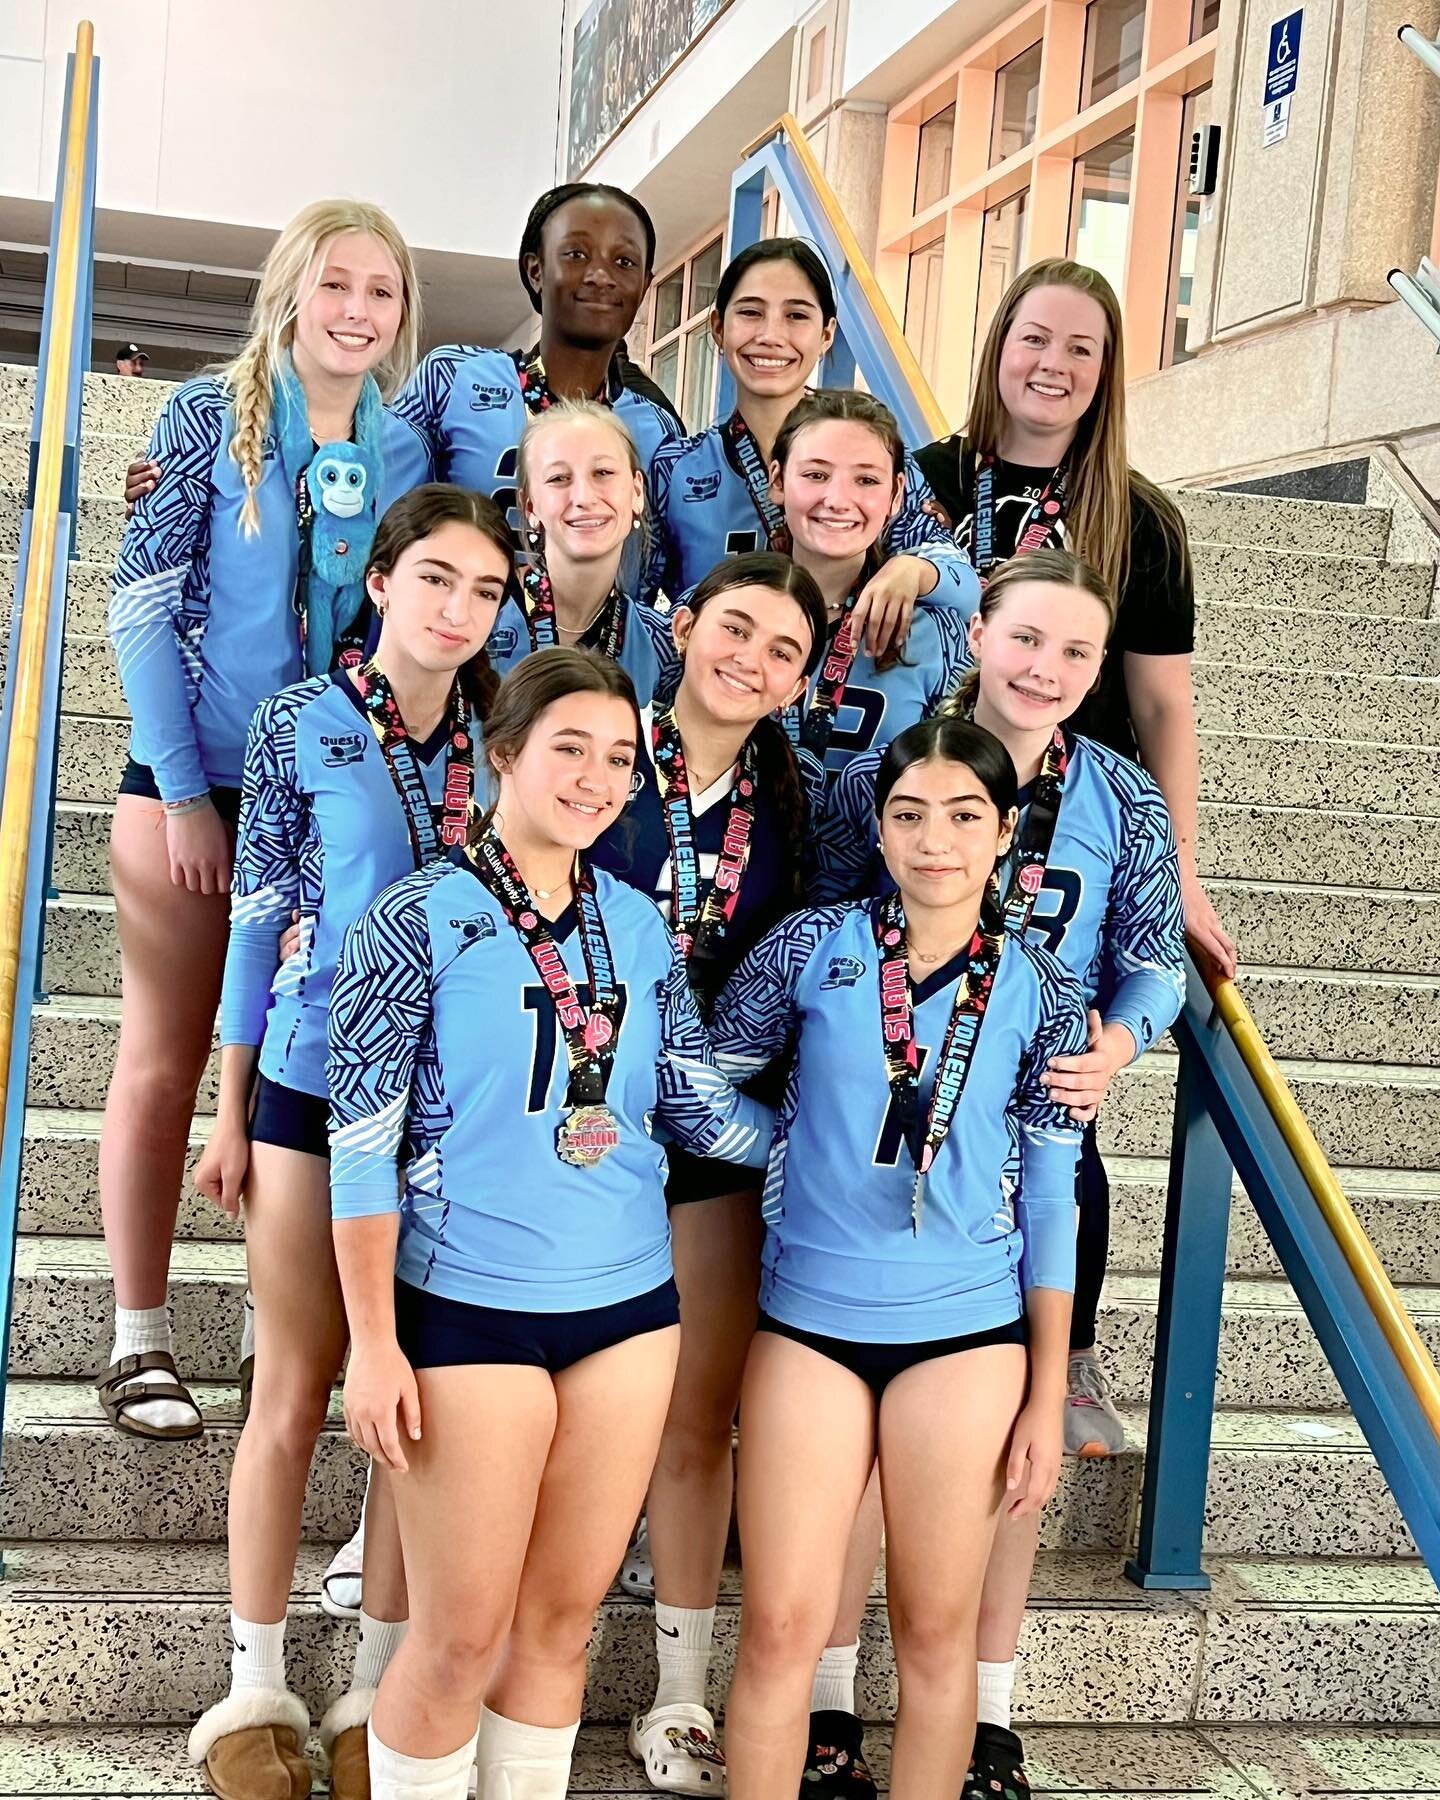 14 Teresa - 1st in Silver🥈14 OPEN (5th overall) at the @jvctournaments Tampa Slam. Tough Day 1 with two matches ending in three sets but a strong finish on Day 2 with a 1st in Silver Bracket!